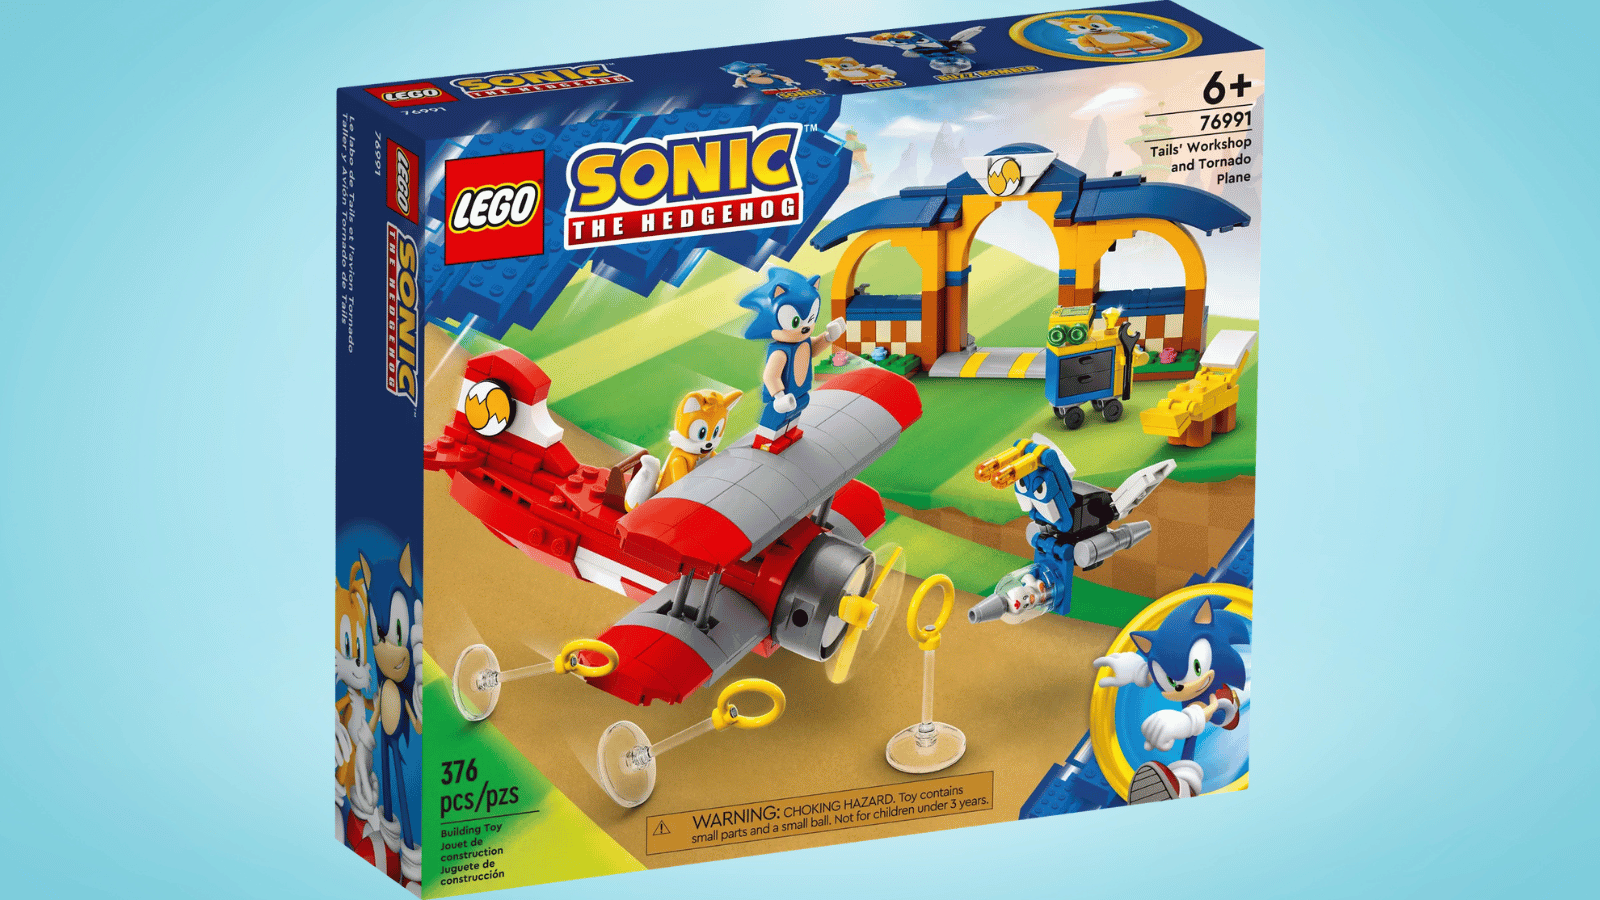 Sonic Tail’s Workshop and Tornado Plane